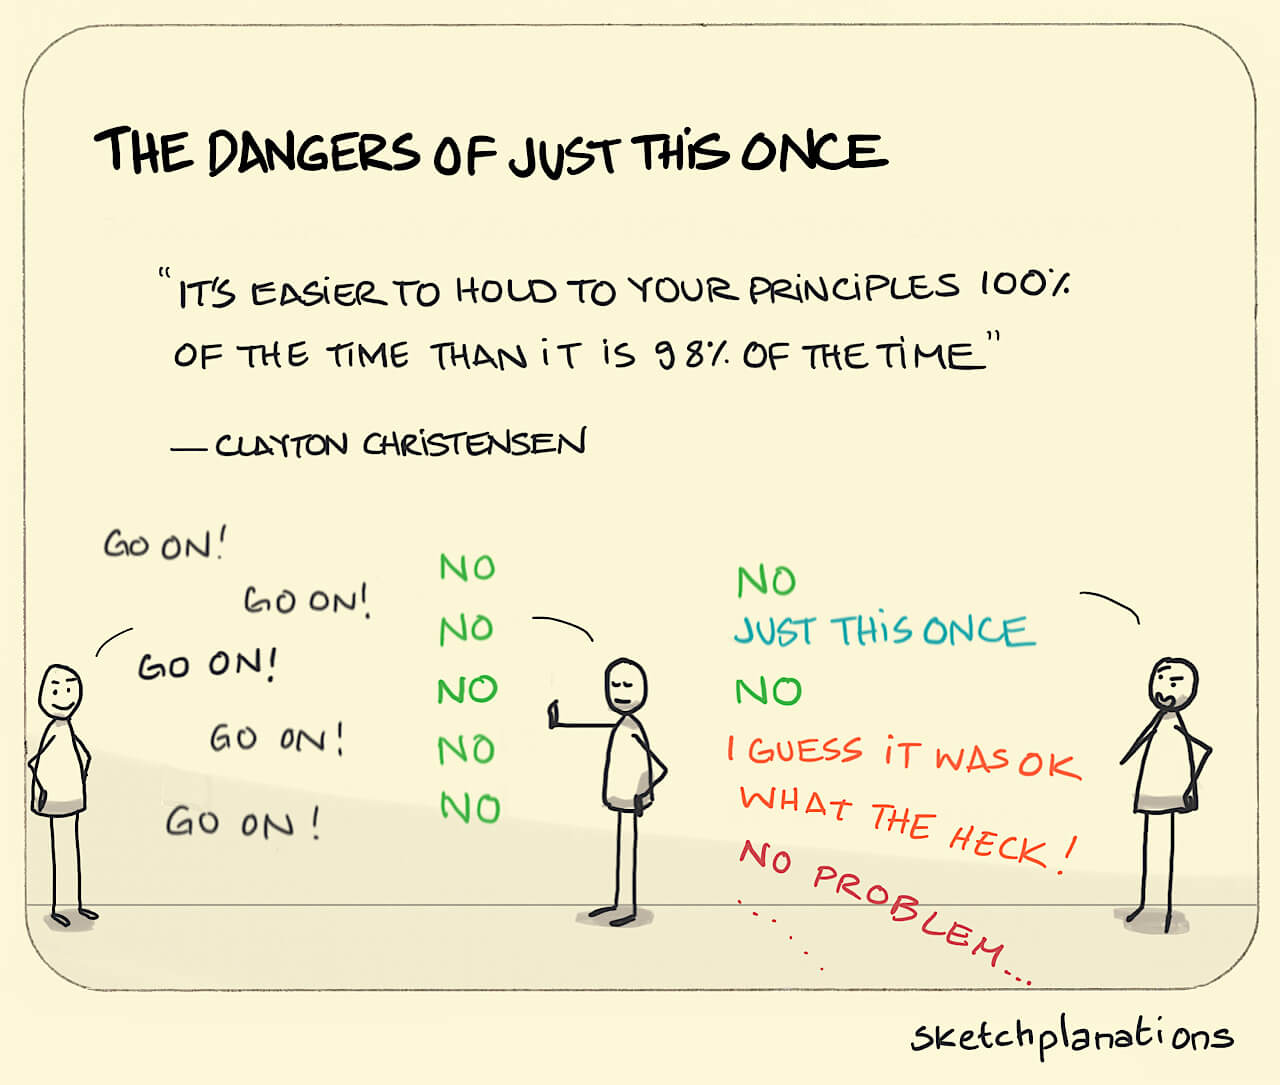 Infografik zu dem Zitat »It‘s easier to hold to your principles 100% of the time than it is 98% of the time.«